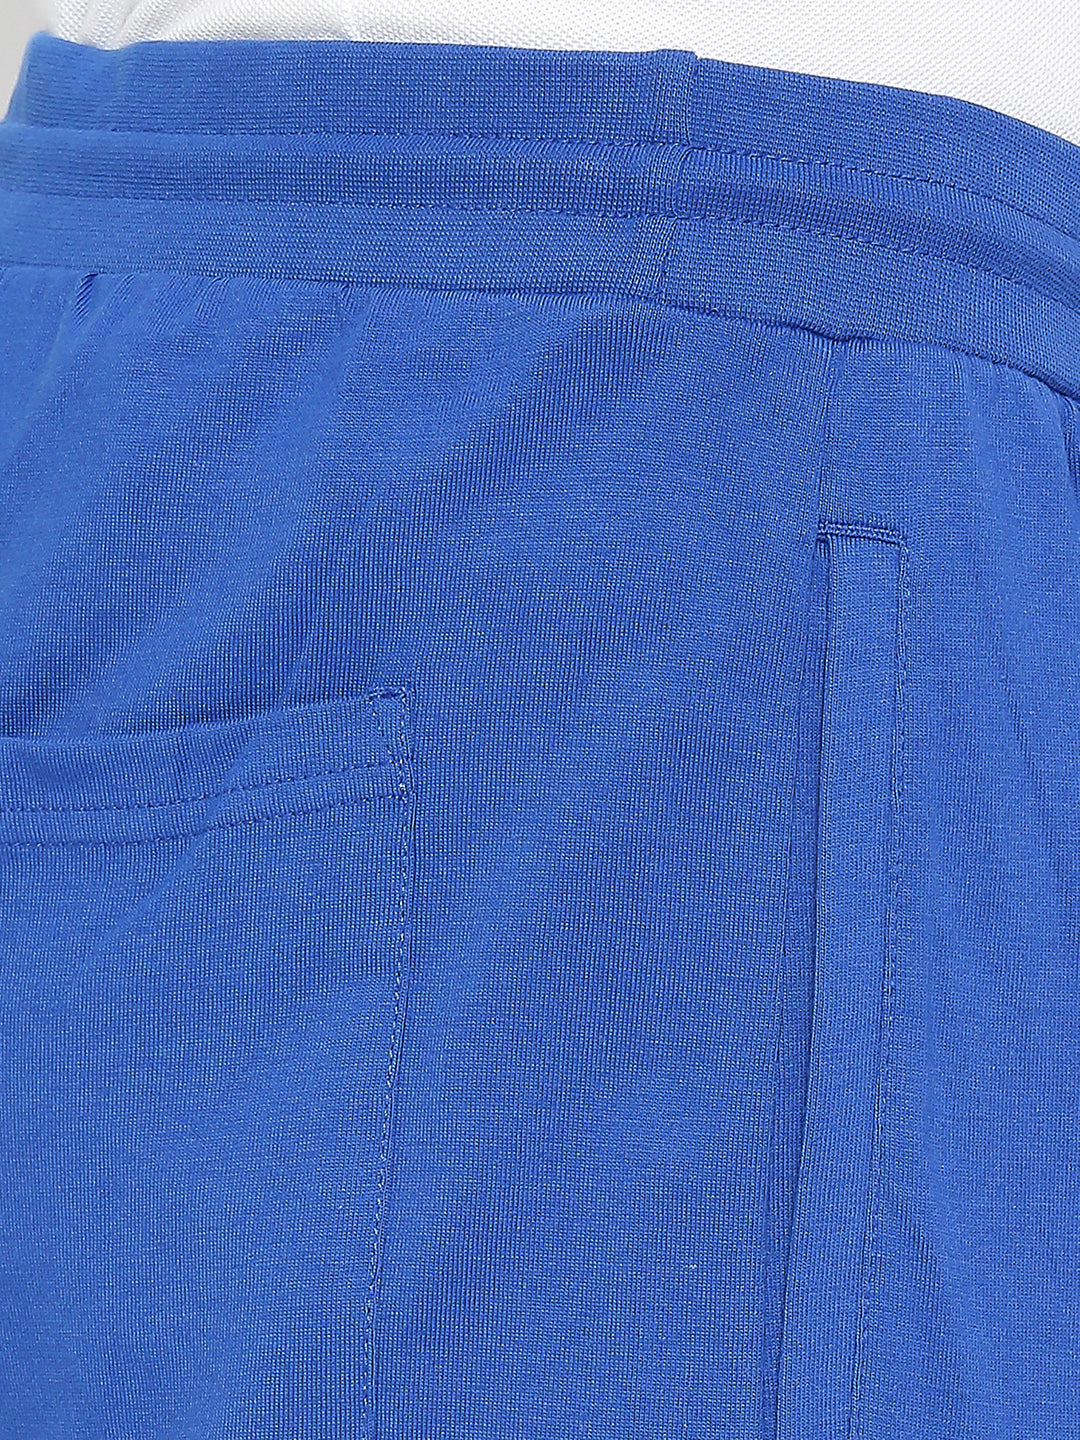 Men Premium Knitted Royal Blue Cotton Trackpant - UnderJeans by Spykar